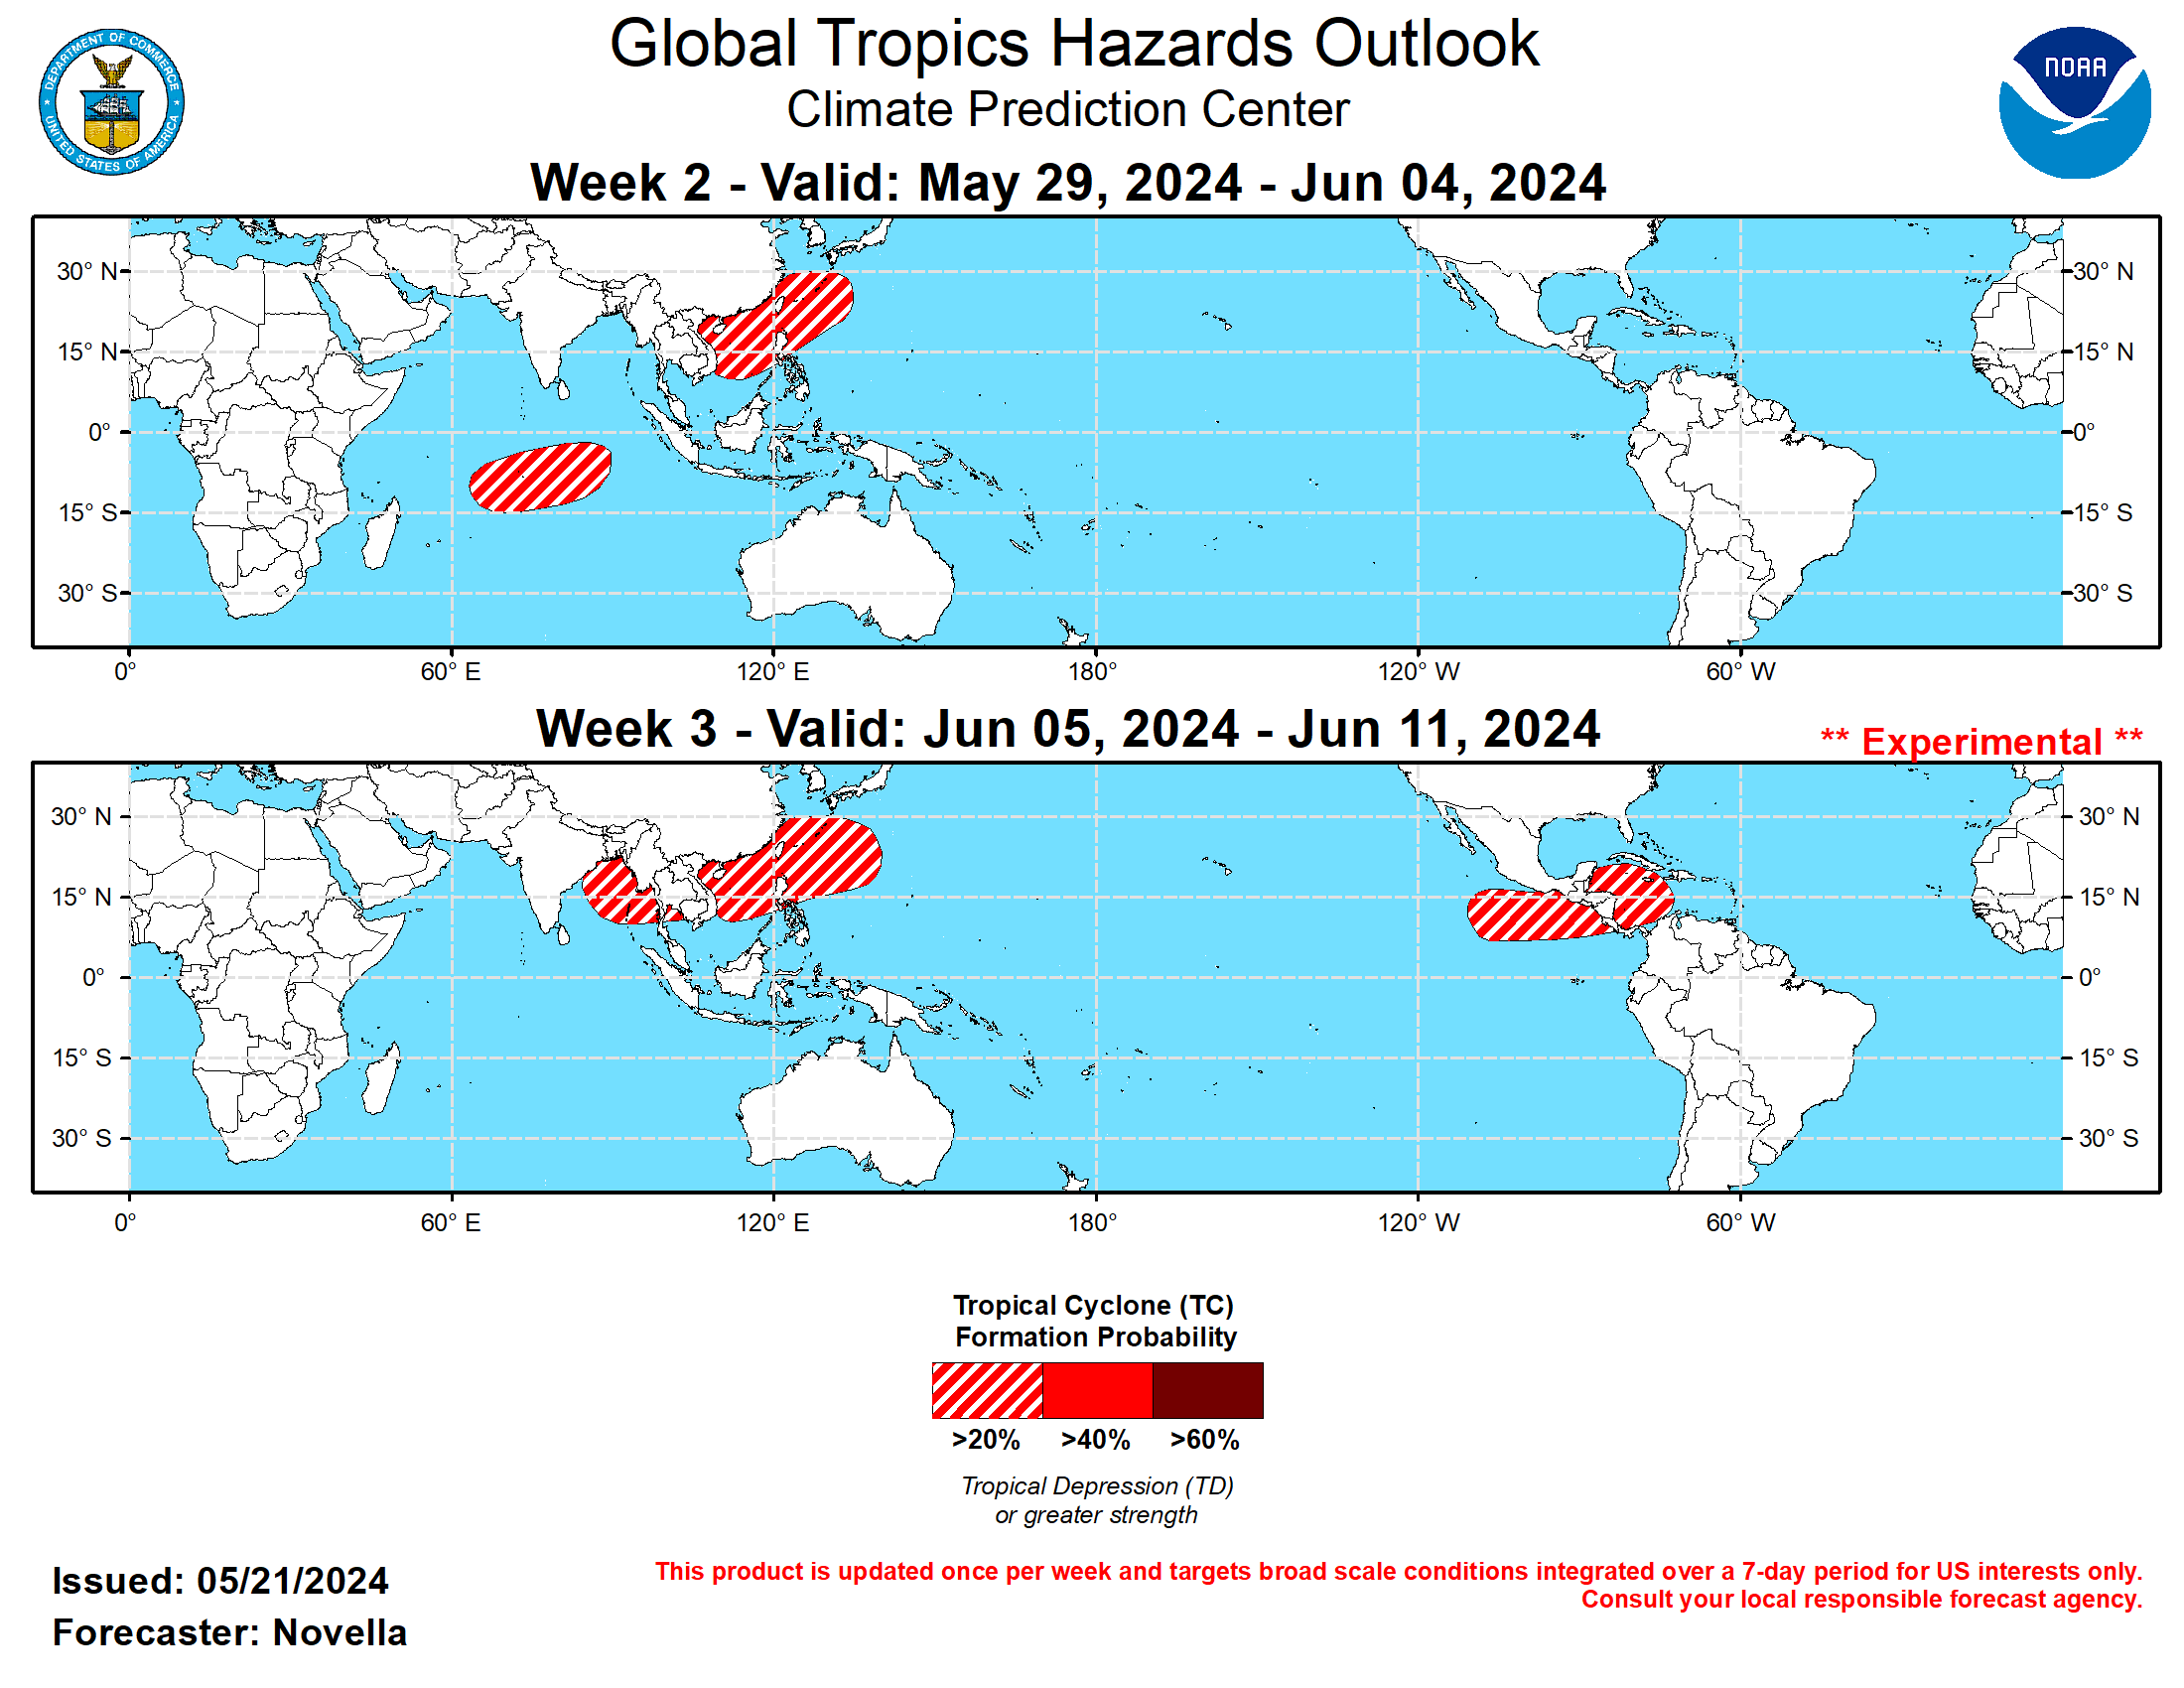 GTH Outlook Discussion Last Updated - 05/21/24 Valid - 05/29/24 - 06/11/24 As previously forecast, the Madden-Juilan Oscillation (MJO) showed better signs of reorganization over the Indian Ocean during the past week. The renewal is well supported in RMM space which continues to depict an emerging and eastward propagating signal over phase 3, as well as the upper-level velocity potential anomaly fields which reveal a better spatial definition of the enhanced and suppressed envelopes across the global tropics. Objective wavenumber-frequency filtering of these anomaly fields also show a good deal of continued equatorial Kelvin and Rossby wave activity in the eastern Hemisphere, which has aided in the large-scale enhancement of convection and divergence aloft over the Indian Ocean.  The tropical perspective largely remains on track since last week, as dynamical models are supportive of the continued eastward propagation of the MJO over the Maritime Continent. Tropical Cyclone (TC) development remains favored in the Indian Ocean and western Pacific through the end of May, however the MJO picture becomes much less clear heading later into June. Consistent with the two previous trips of the MJO over the Maritime Continent this spring, RMM forecasts feature a rapid weakening of the signal over phase 5 early next month with some ensemble members reaching the western Pacific at a low amplitude. Upper-level velocity potential anomaly forecasts from the GEFS, CFSv2, and ECMWF have fallen more in-line with the weaker RMM guidance, but suggest that any disorganization may be tied to destructive interference with an emerging low frequency circulation response over the Maritime Continent. Such a response would be consistent, albeit early, with the transitioning ENSO state, as any western Pacific and/or western Hemisphere MJO activity may have difficulty maintaining a canonical wave-1 structure propagating eastward with time. Notwithstanding, objective filtering of these fields do show some semblance of MJO activity and enhanced divergence aloft reaching the tropical Americas (mainly expressed north of the equator) by the week-3 period, which could provide more favorable conditions for tropical cyclogenesis over the eastern Pacific and the Caribbean later in June.  The recent amplification of the MJO, as well as the aforementioned modes of tropical variability traversing the Indian Ocean, resulted in a strong uptick in lower-level westerlies along the equator, and generated a pair of remarkably low-latitude, late season TCs forming in the southern basin. Since forming on 5/17 near 9S/53E, TC Ialy strengthened to Tropical Storm intensity while recurving northwestward under the steering influence of a subtropical ridge over eastern equatorial Africa. The Joint Typhoon Warning Center (JTWC) expects Ialy to succumb to dry air entrainment and fully dissipate in the next day or so, though its remnant circulation may bring elevated winds and increased precipitation amounts to parts of coastal Kenya and southern Somalia. Farther east, TC 25S formed near 2S/75E on 5/19 and dissipated earlier today. Despite being weak and short-lived, this TC is notable for forming so close to the equator where Coriolis is nearly zero, and underscores the potency of the strengthening equatorial westerlies associated with the renewed MJO.  During week-1, lower-level wind anomaly forecasts feature another surge of westerlies (possible wind burst event) between 80E to 90E along the equator favorable for additional TC development. Deterministic model solutions are nearly unanimous in forming a TC in the Bay of Bengal later this week, however a secondary signal emerges in the probabilistic TC genesis tools south of the equator late in week-1. Usually, climatology dictates that any TC potential south of the equator would be rather dubious for late May, but in light of the multiple TCs forming in the southern Indian Ocean during the past week, this potential is not being ruled out and 20% chances for genesis are posted from approximately 65E to 90E in the week-2 outlook. Following potential TC development favored to the east of the Philippines during week-1, 20% chances are also posted from the South China Sea to the south of Japan where anomalous lower-level westerlies and deepening mean low pressure are favored in the GEFS and ECMWF ensembles, with support from TC composites featuring increased chances above climatology during Apr-Jun phase 4 and 5 MJO events in the highlighted area.  Based on these composites and extended range probabilistic TC tools maintaining increased signals for TC development in the northern Indian Ocean and western Pacific, 20% chances are issued from the Bay of Bengal to the Philippine Sea for week-3. Higher chances (40%) were considered based on the GEFS, however the ECMWF remains more muted with this potential. Despite some of the uncertainties with the coherence of the MJO as it propagates eastward, there is good agreement between the GEFS and ECMWF featuring a flip from an enhanced trade regime to anomalous lower-level westerlies overspreading the tropical Americas during week-3. With more favorable upper-level conditions predicted to help relax shear, and record breaking warm sea surface temperatures in the Caribbean (much of the region is well in excess of 29 degrees C), 20% chances for TC development are also issued from the eastern Pacific to the southwestern Caribbean.